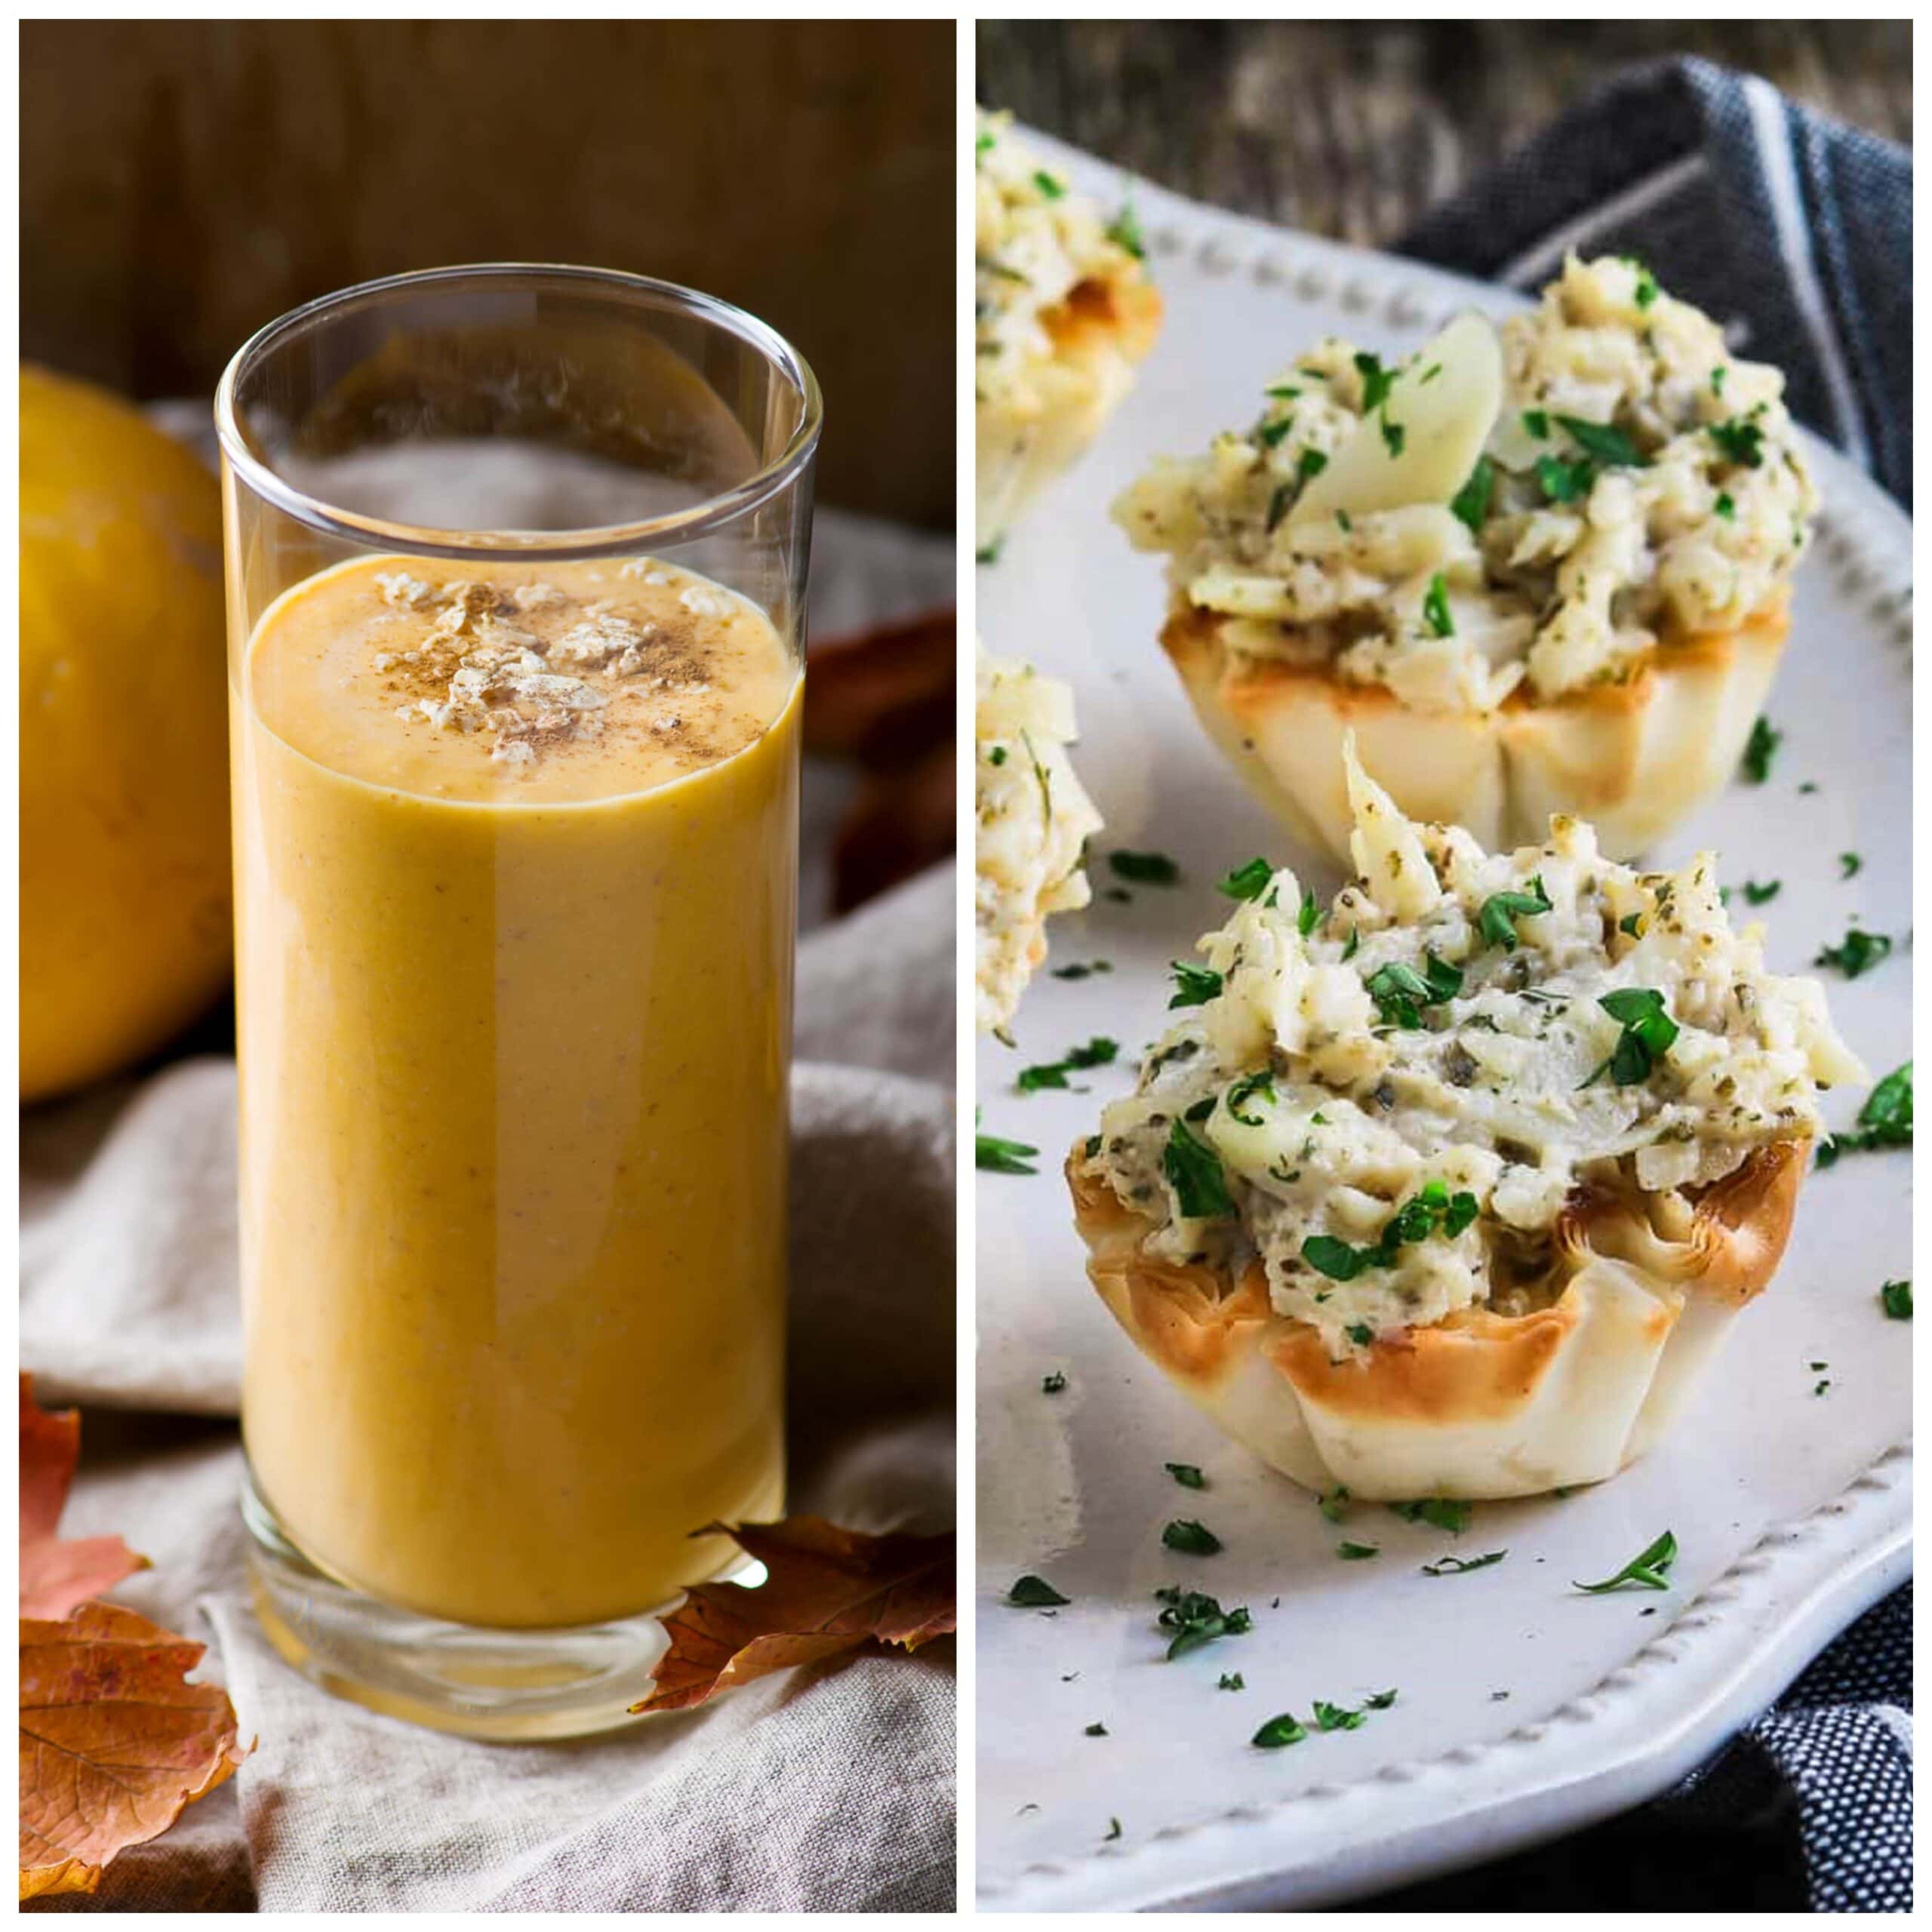 A collage of two images showing a yellow soup shooter and crab cakes.